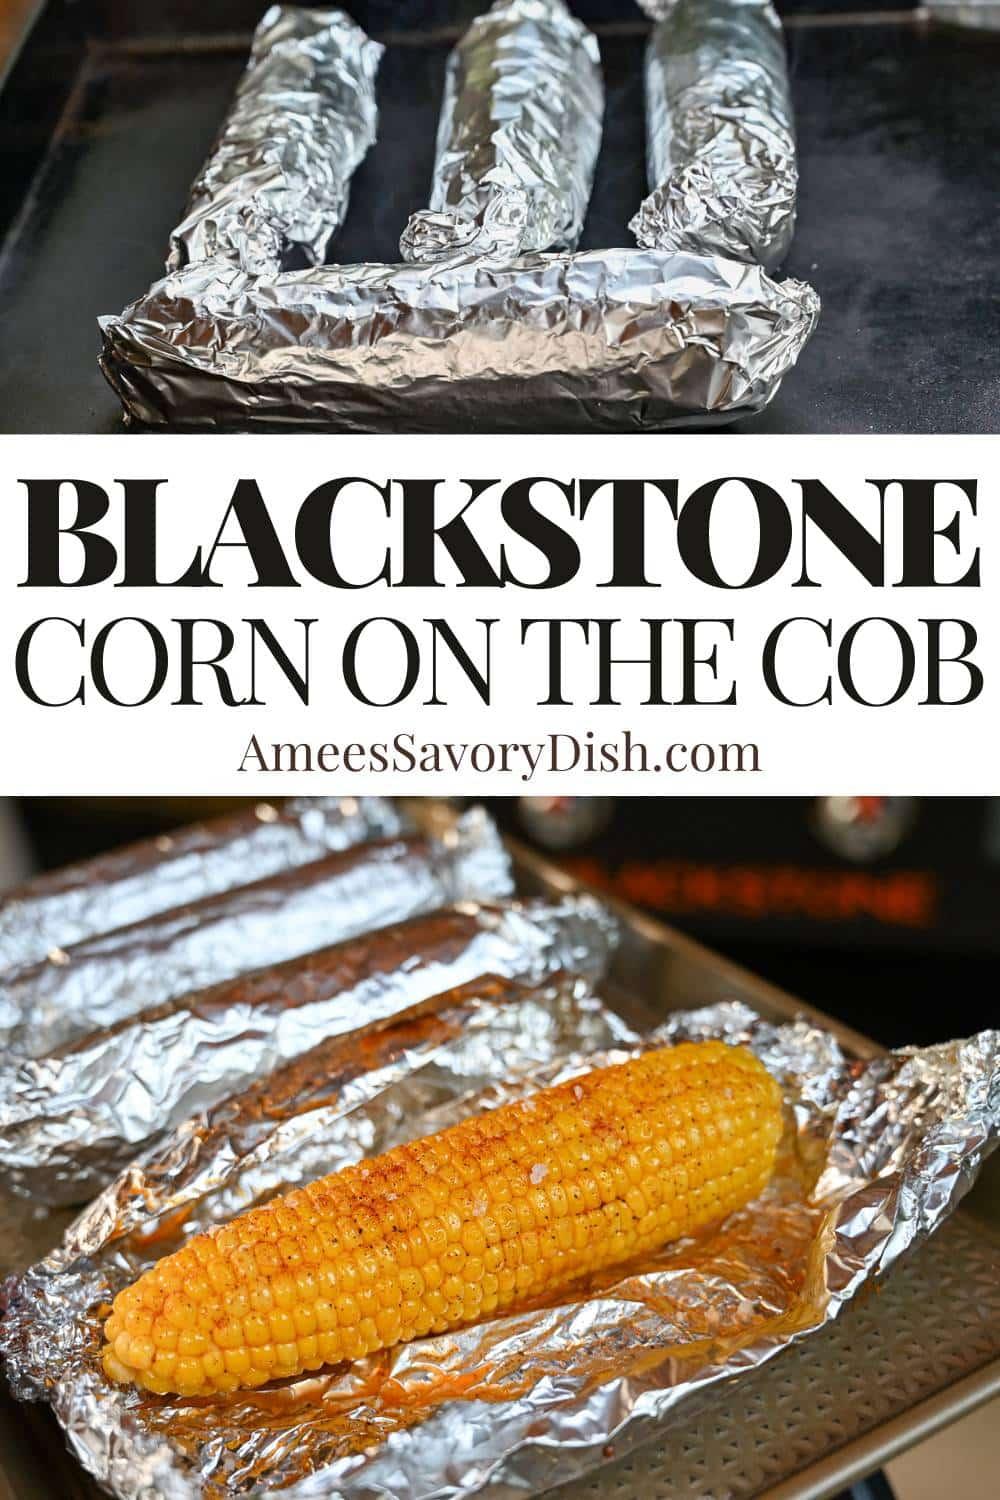 Fire up the griddle! This method consists of searing foil-wrapped, seasoned sweet corn on a flat-top grill for the easiest tastiest corn!